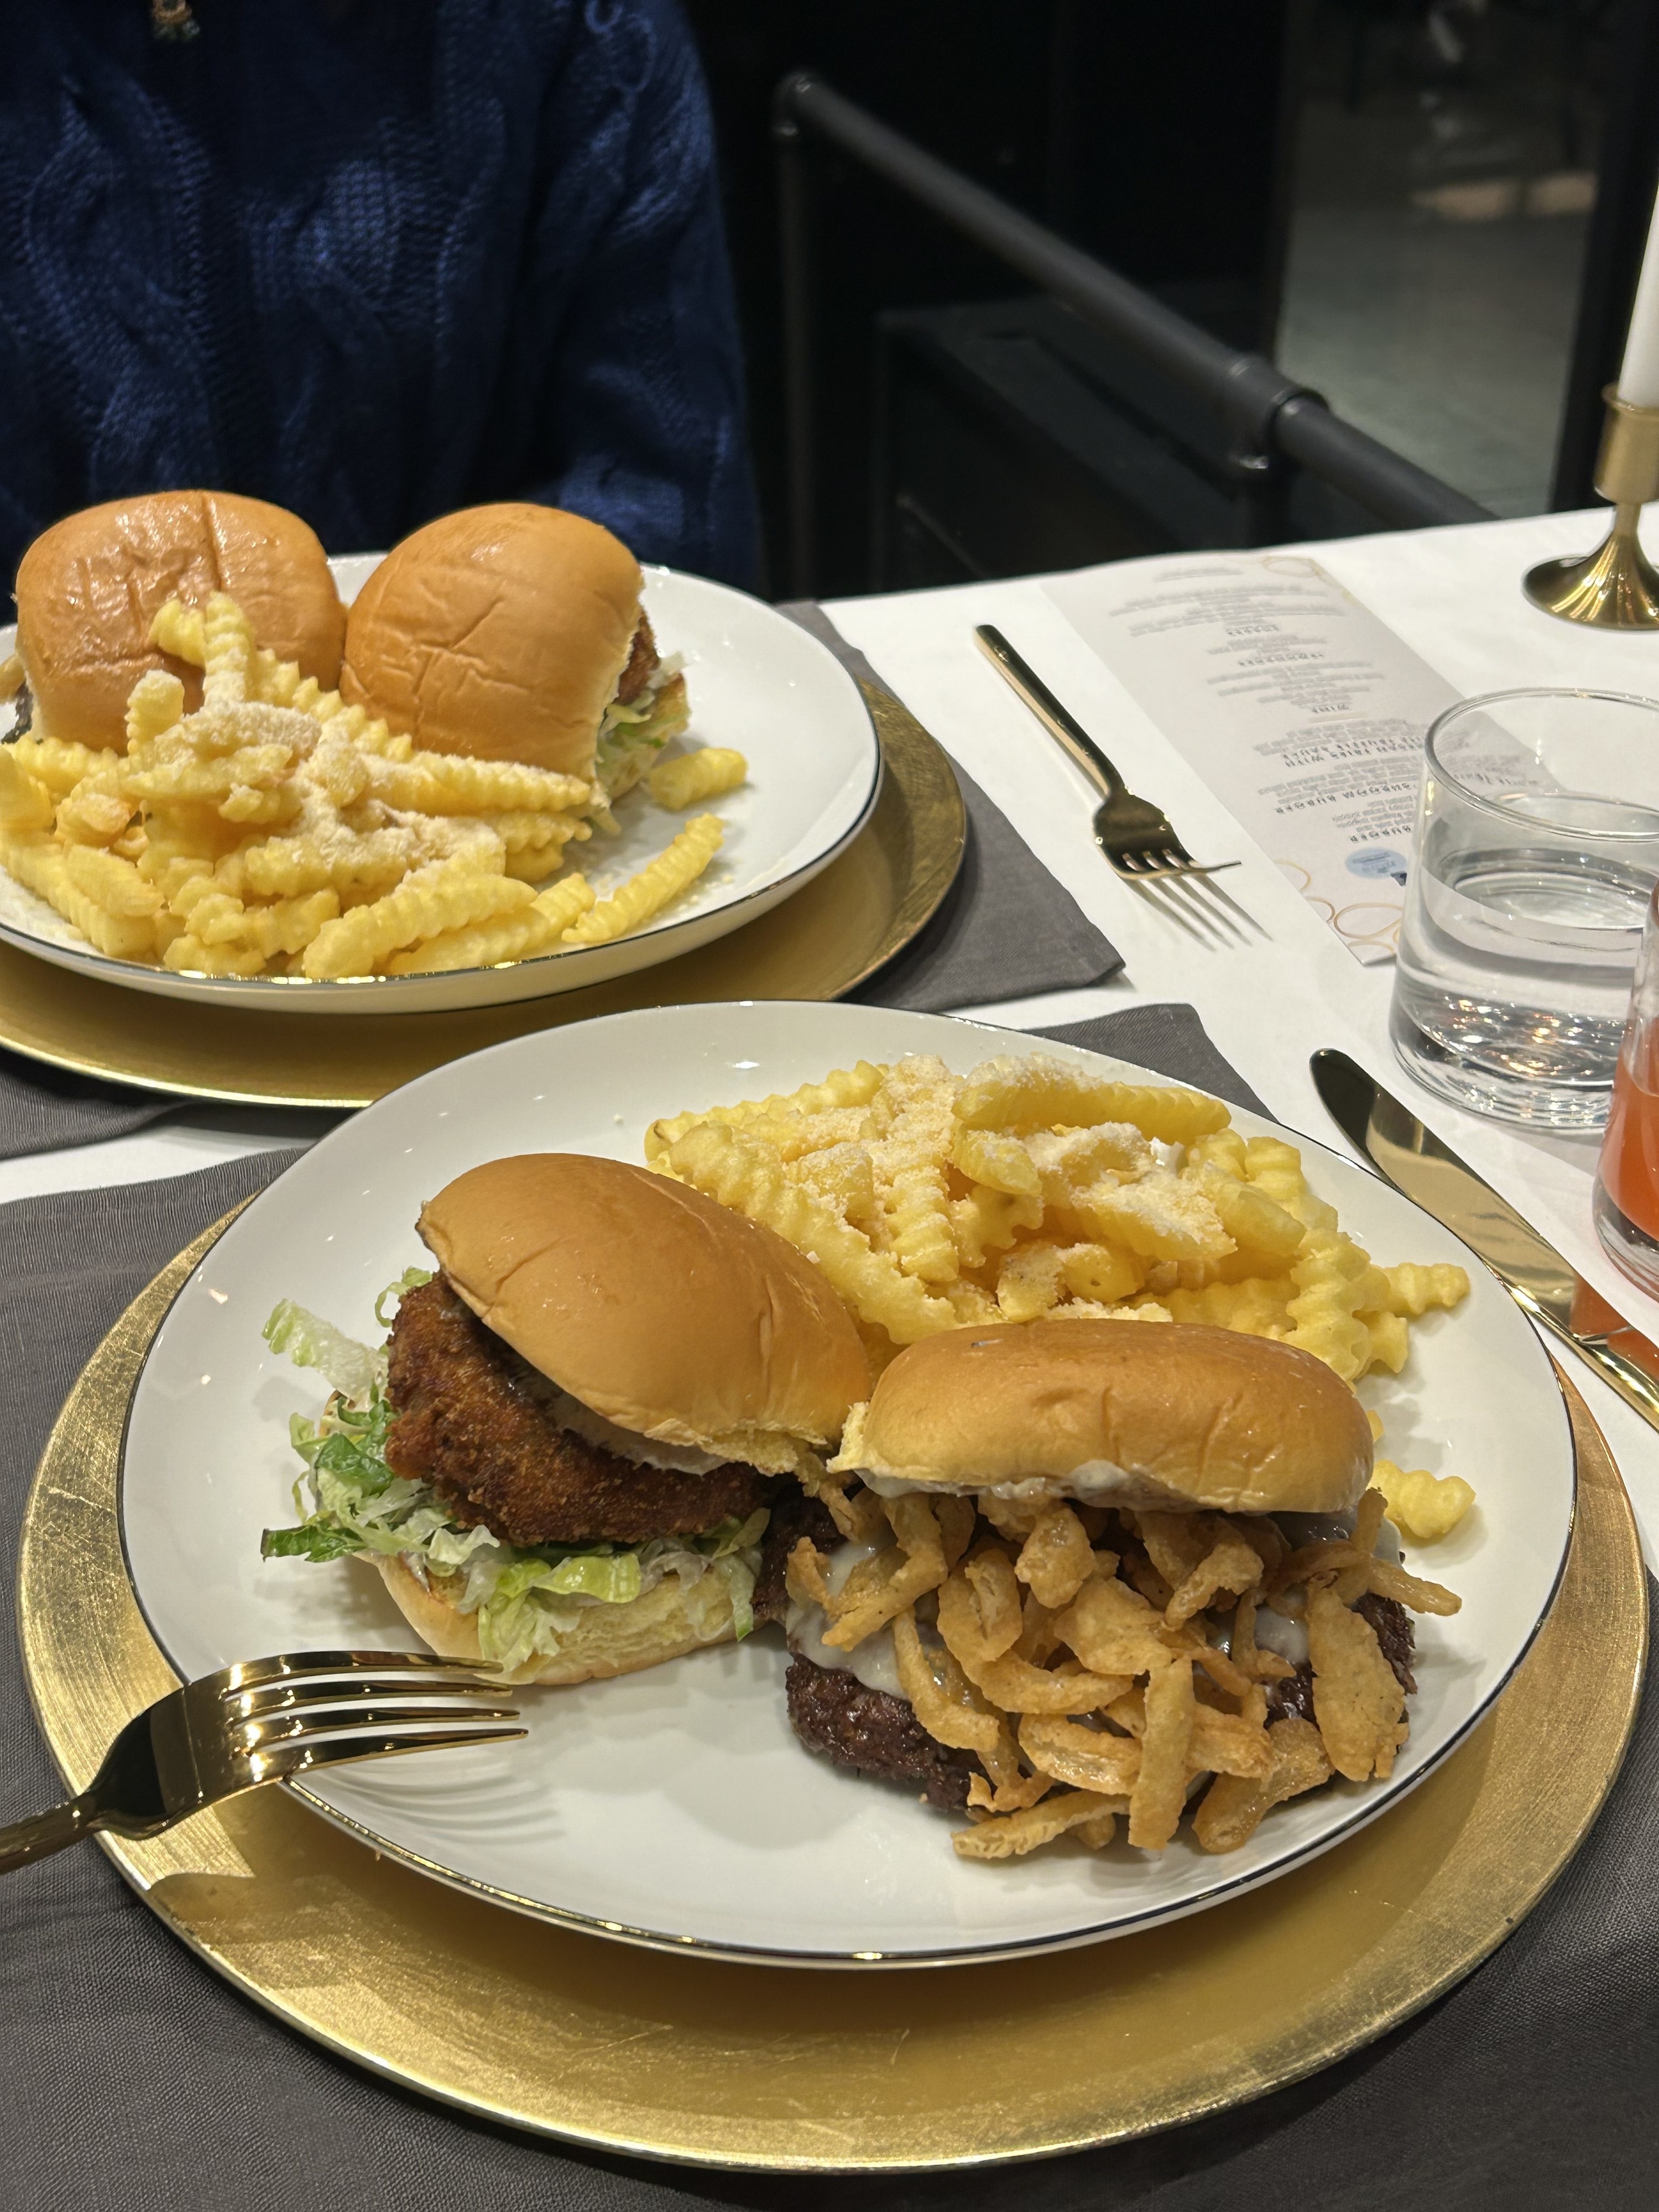 Two plates featuring the White Truffle Burgers and Parmesan Fries